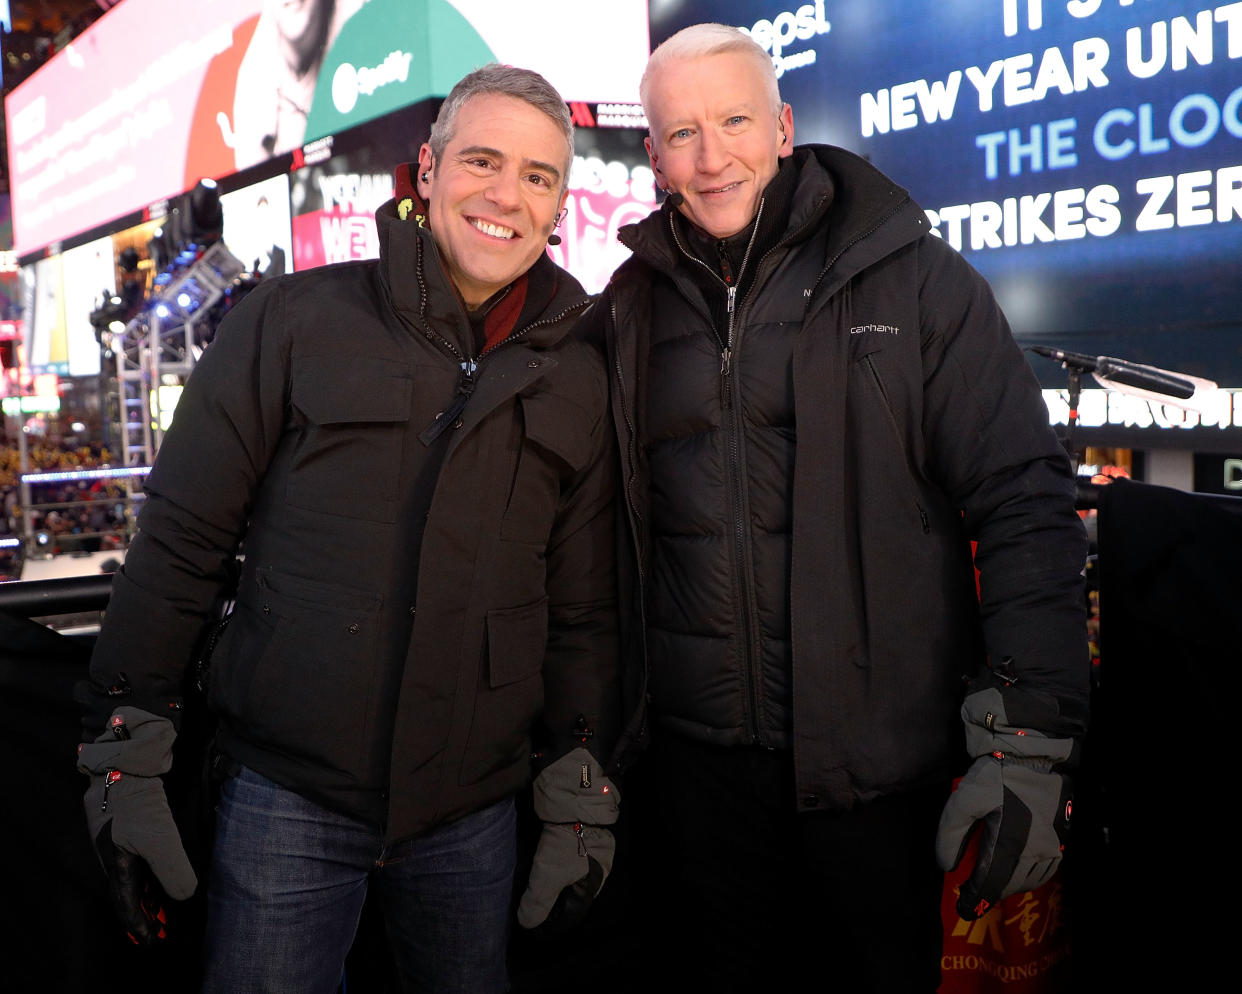 Andy Cohen has co-hosted New Year's Eve Live with Anderson Cooper since 2017. (Photo by Taylor Hill/FilmMagic)